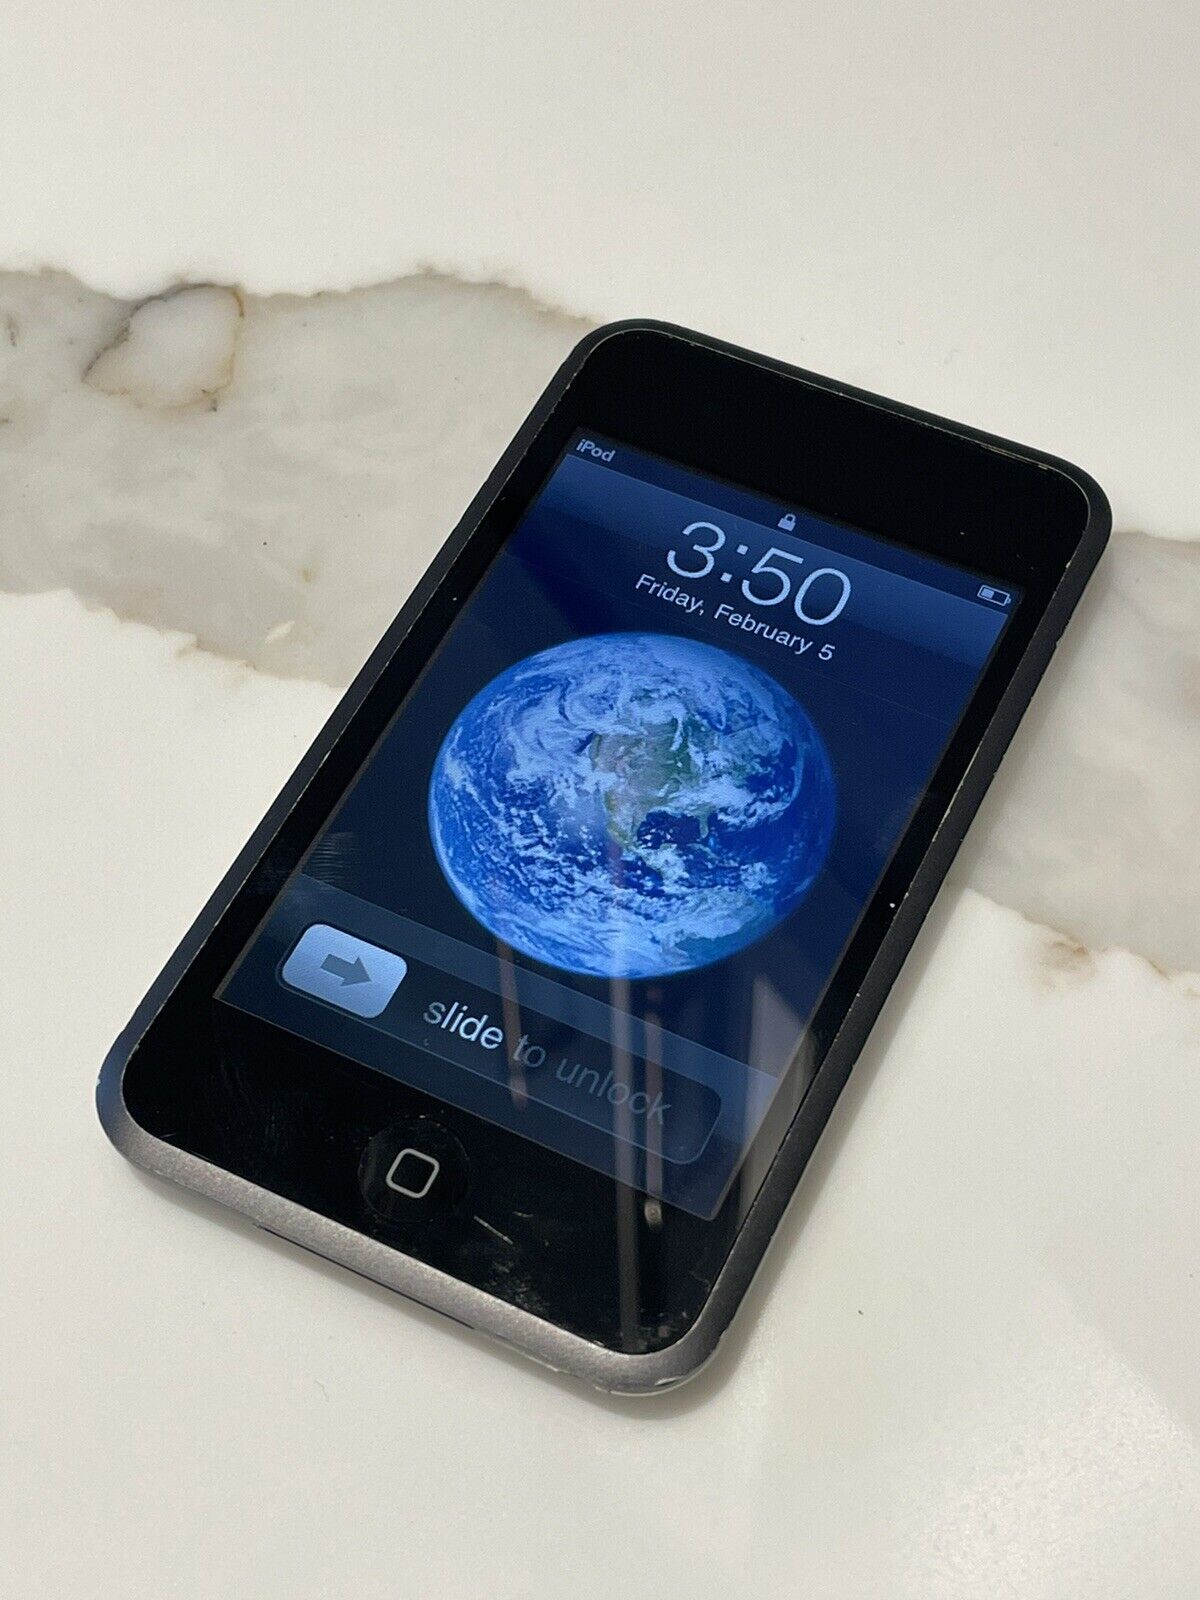 iPod Touch Credence A1213 September 16GB 2007 Black Ranking TOP15